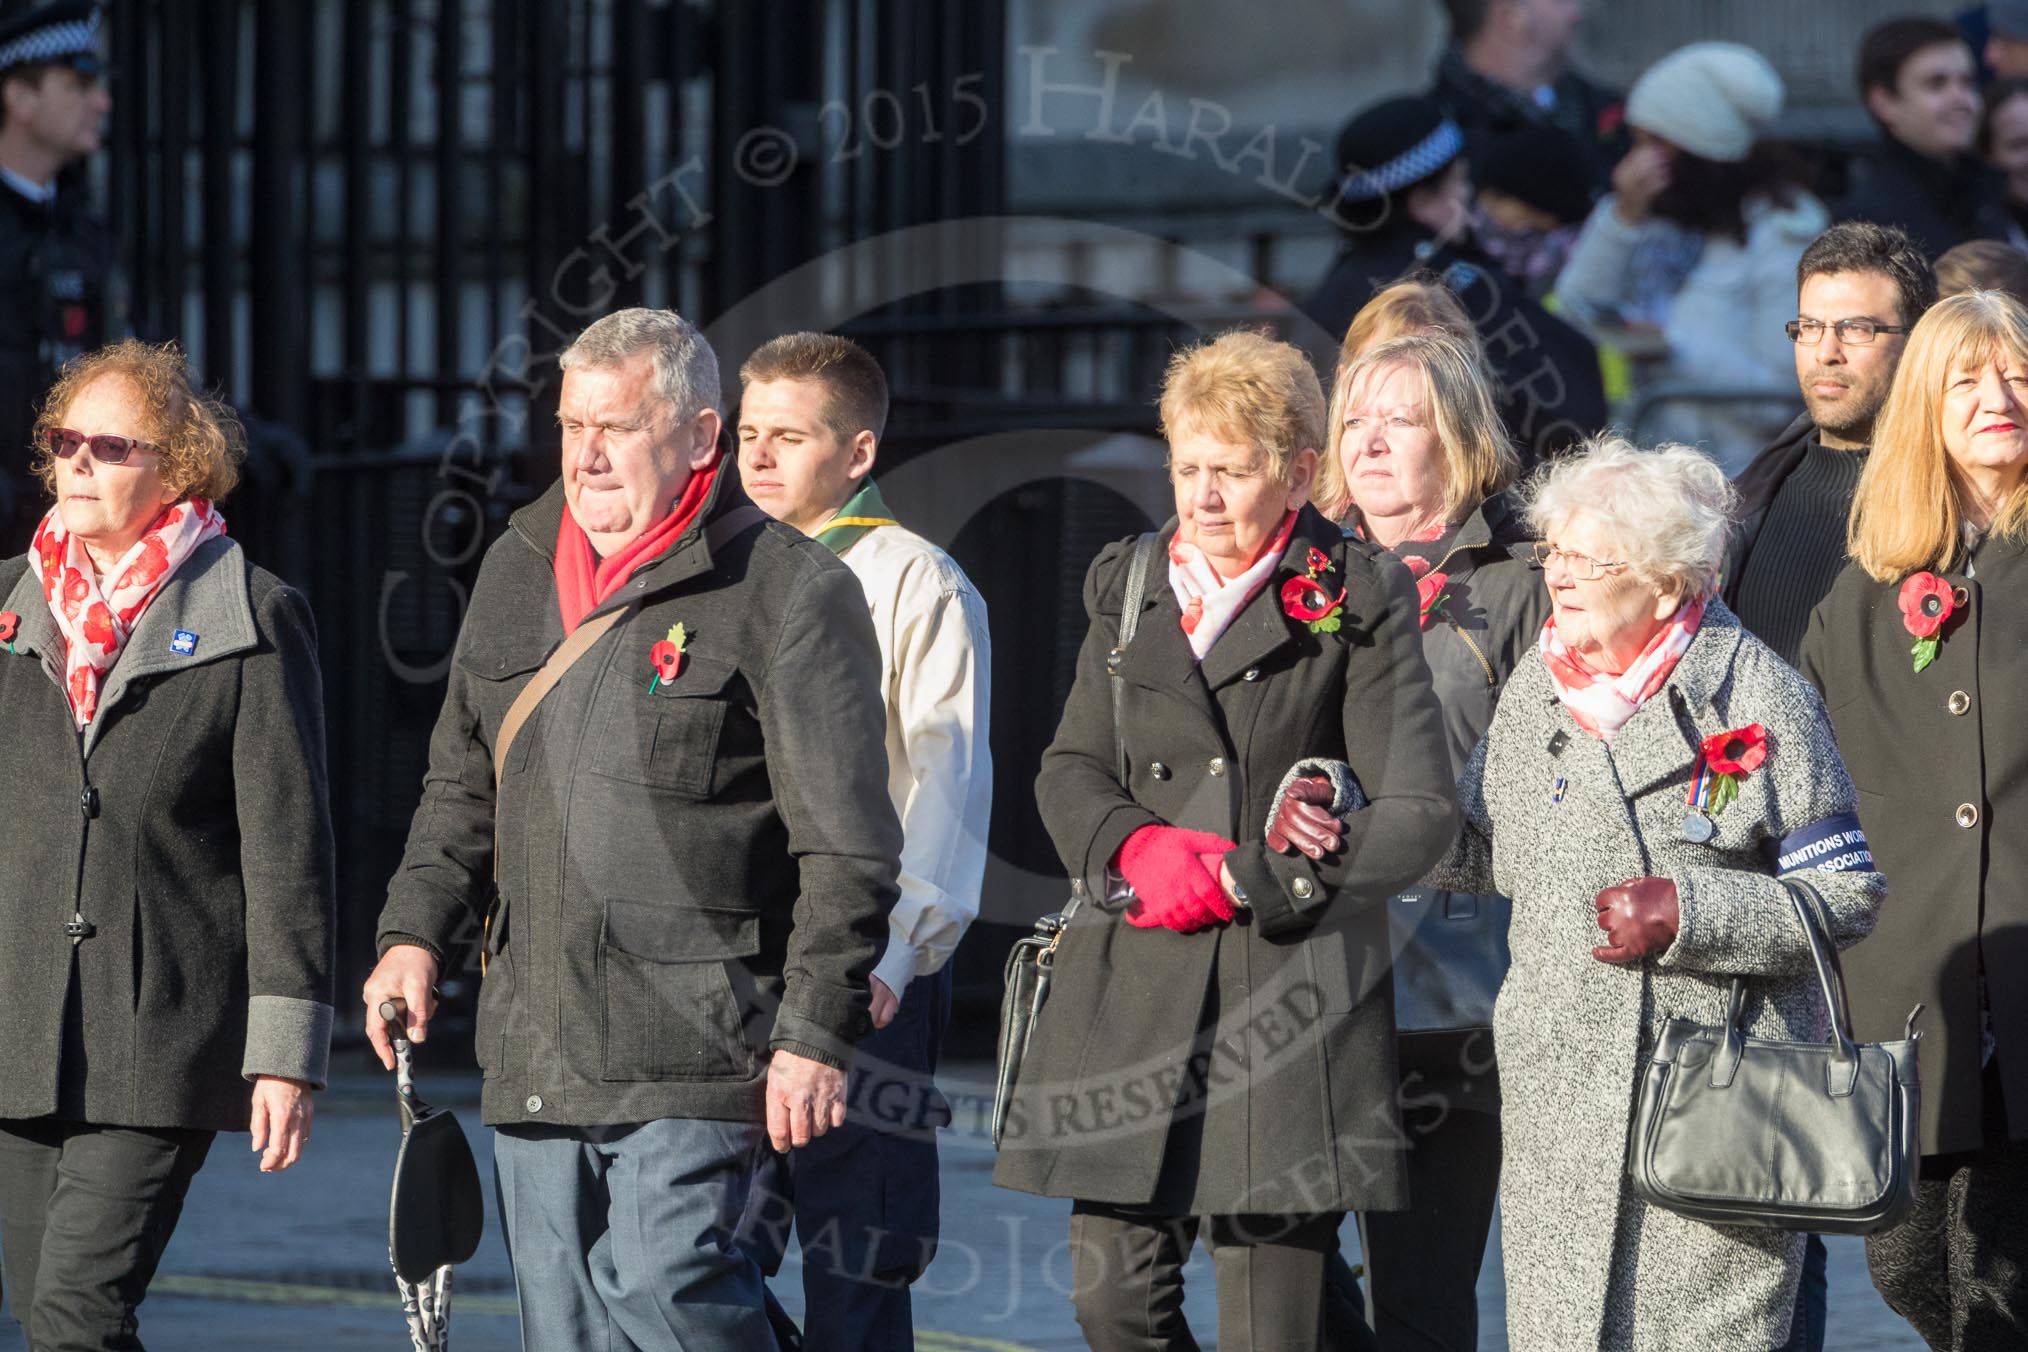 March Past, Remembrance Sunday at the Cenotaph 2016: M49 The British Evacuees Association.
Cenotaph, Whitehall, London SW1,
London,
Greater London,
United Kingdom,
on 13 November 2016 at 13:20, image #3031